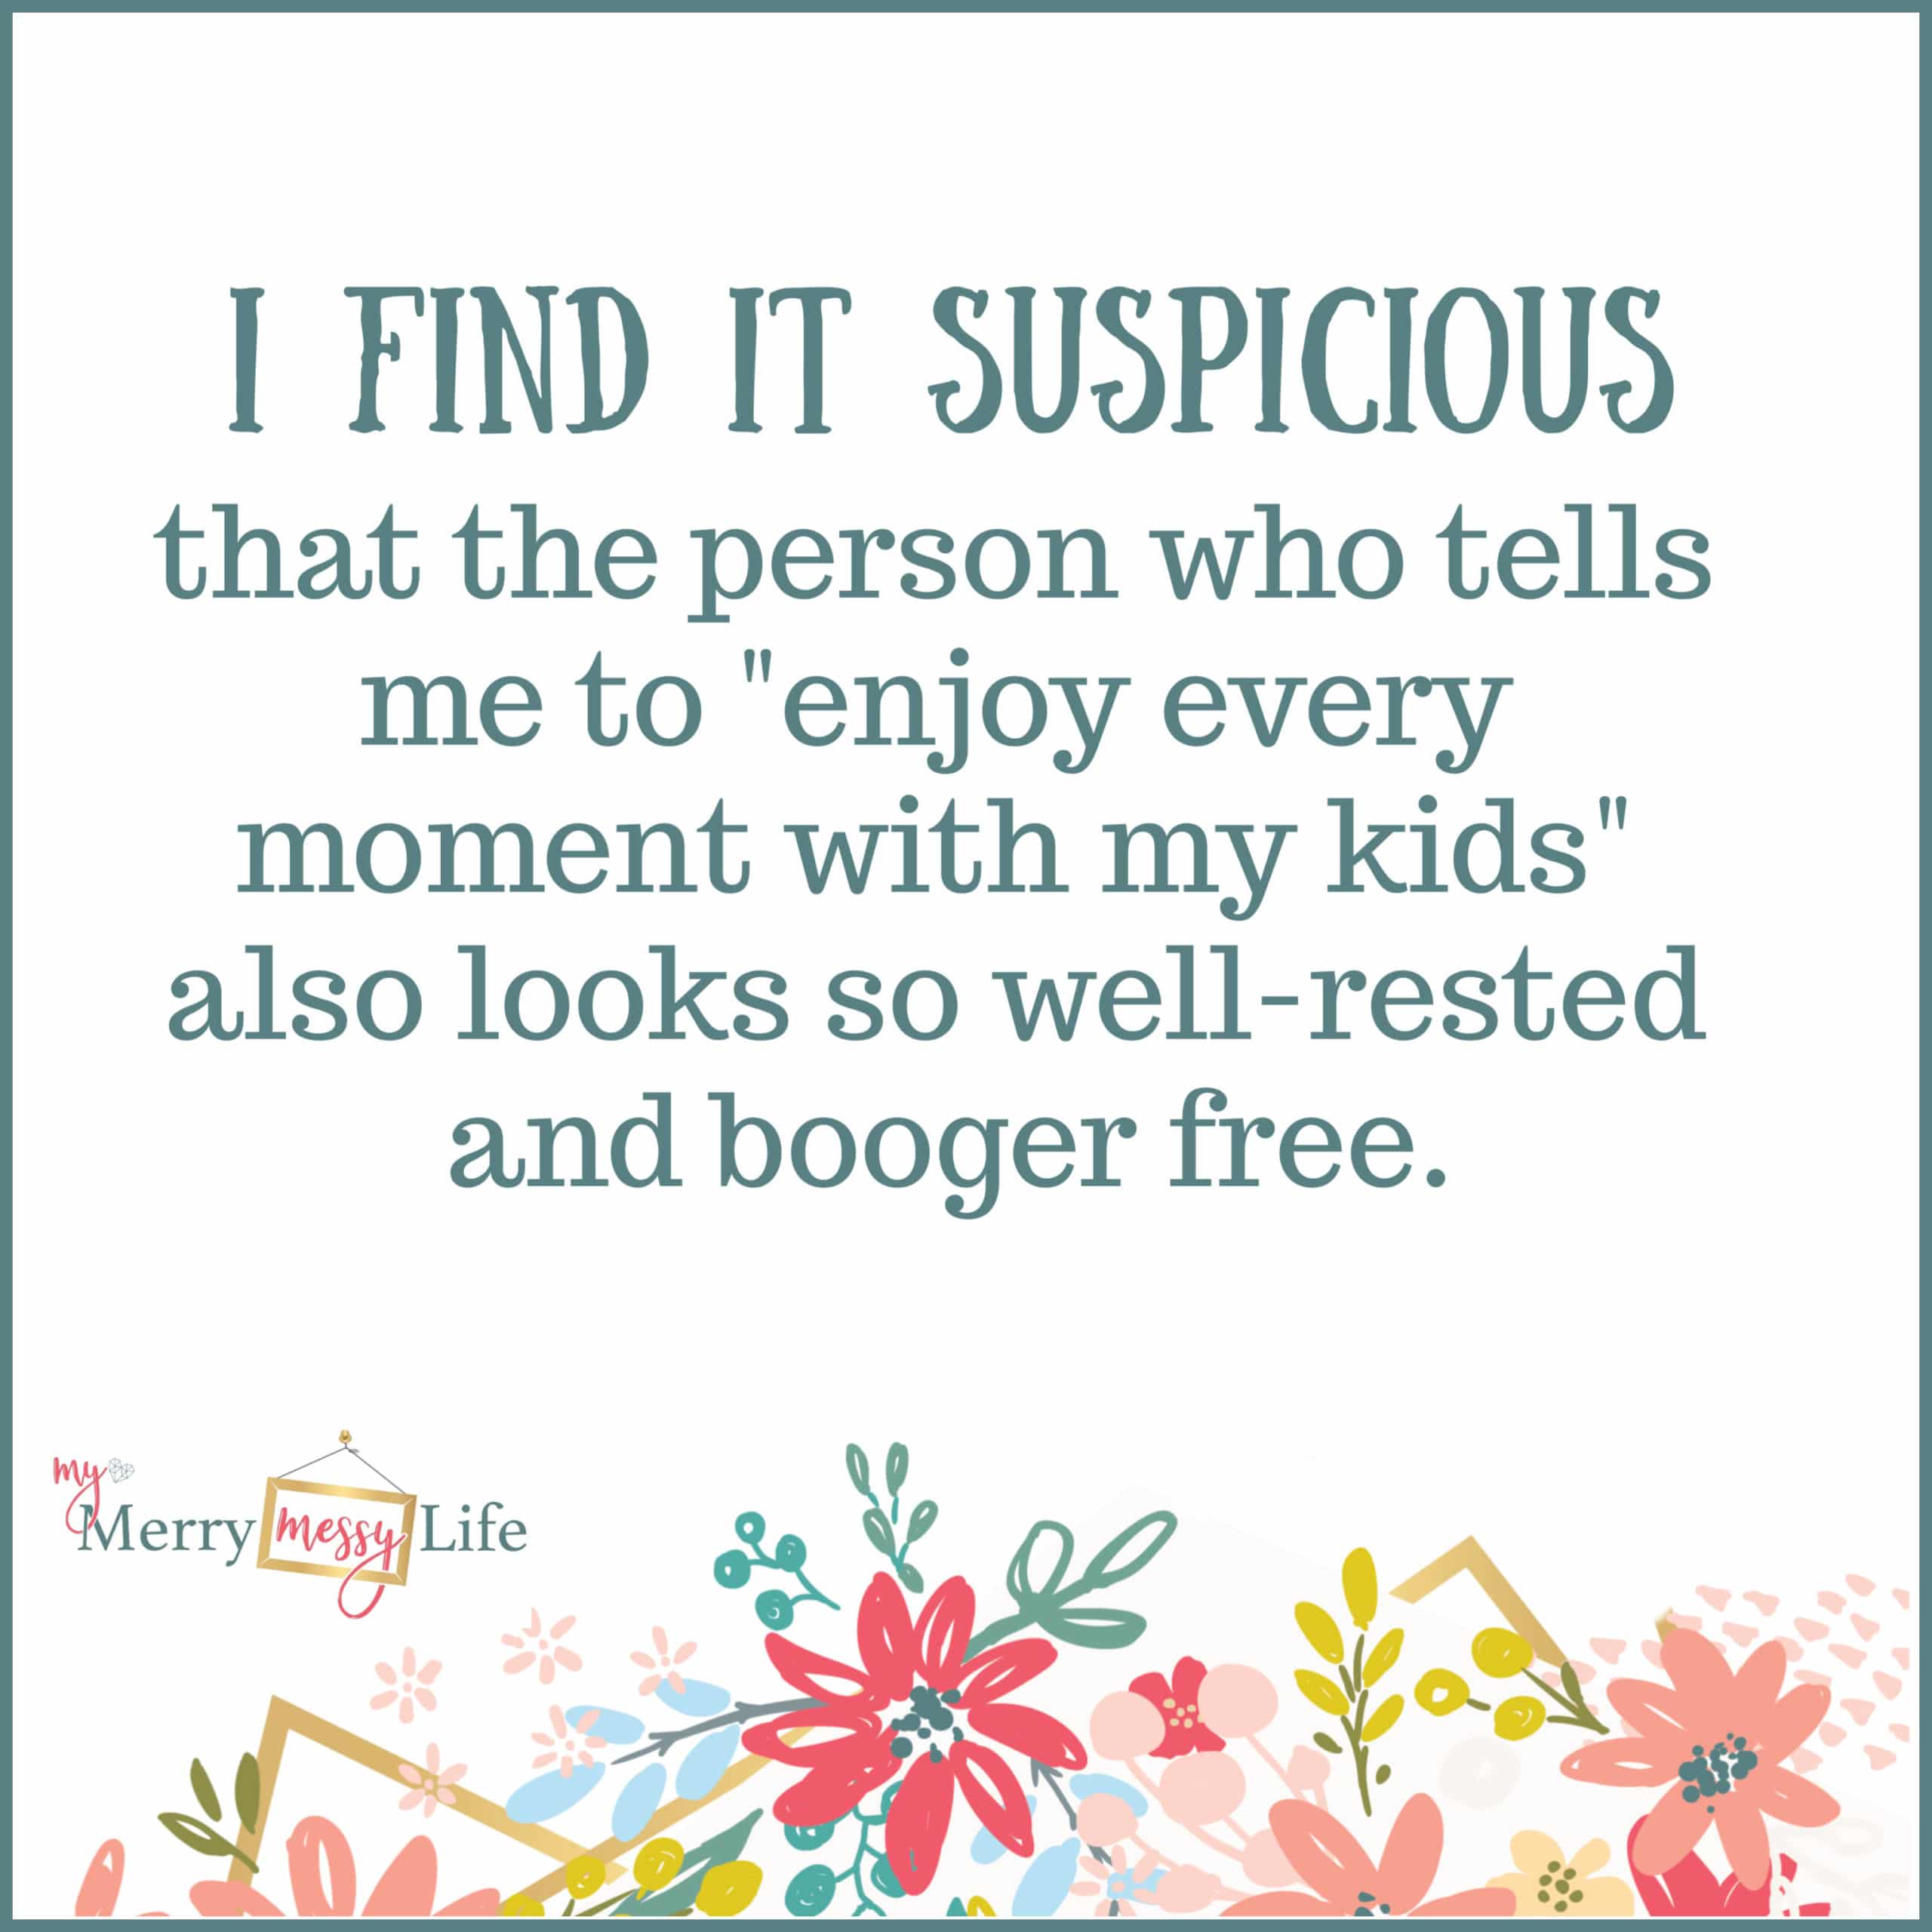 I find it suspicious that the person who tells me to "enjoy every moment with my kids" also looks so well-rested and booger free. - Funny Mom Memes about Baby Life